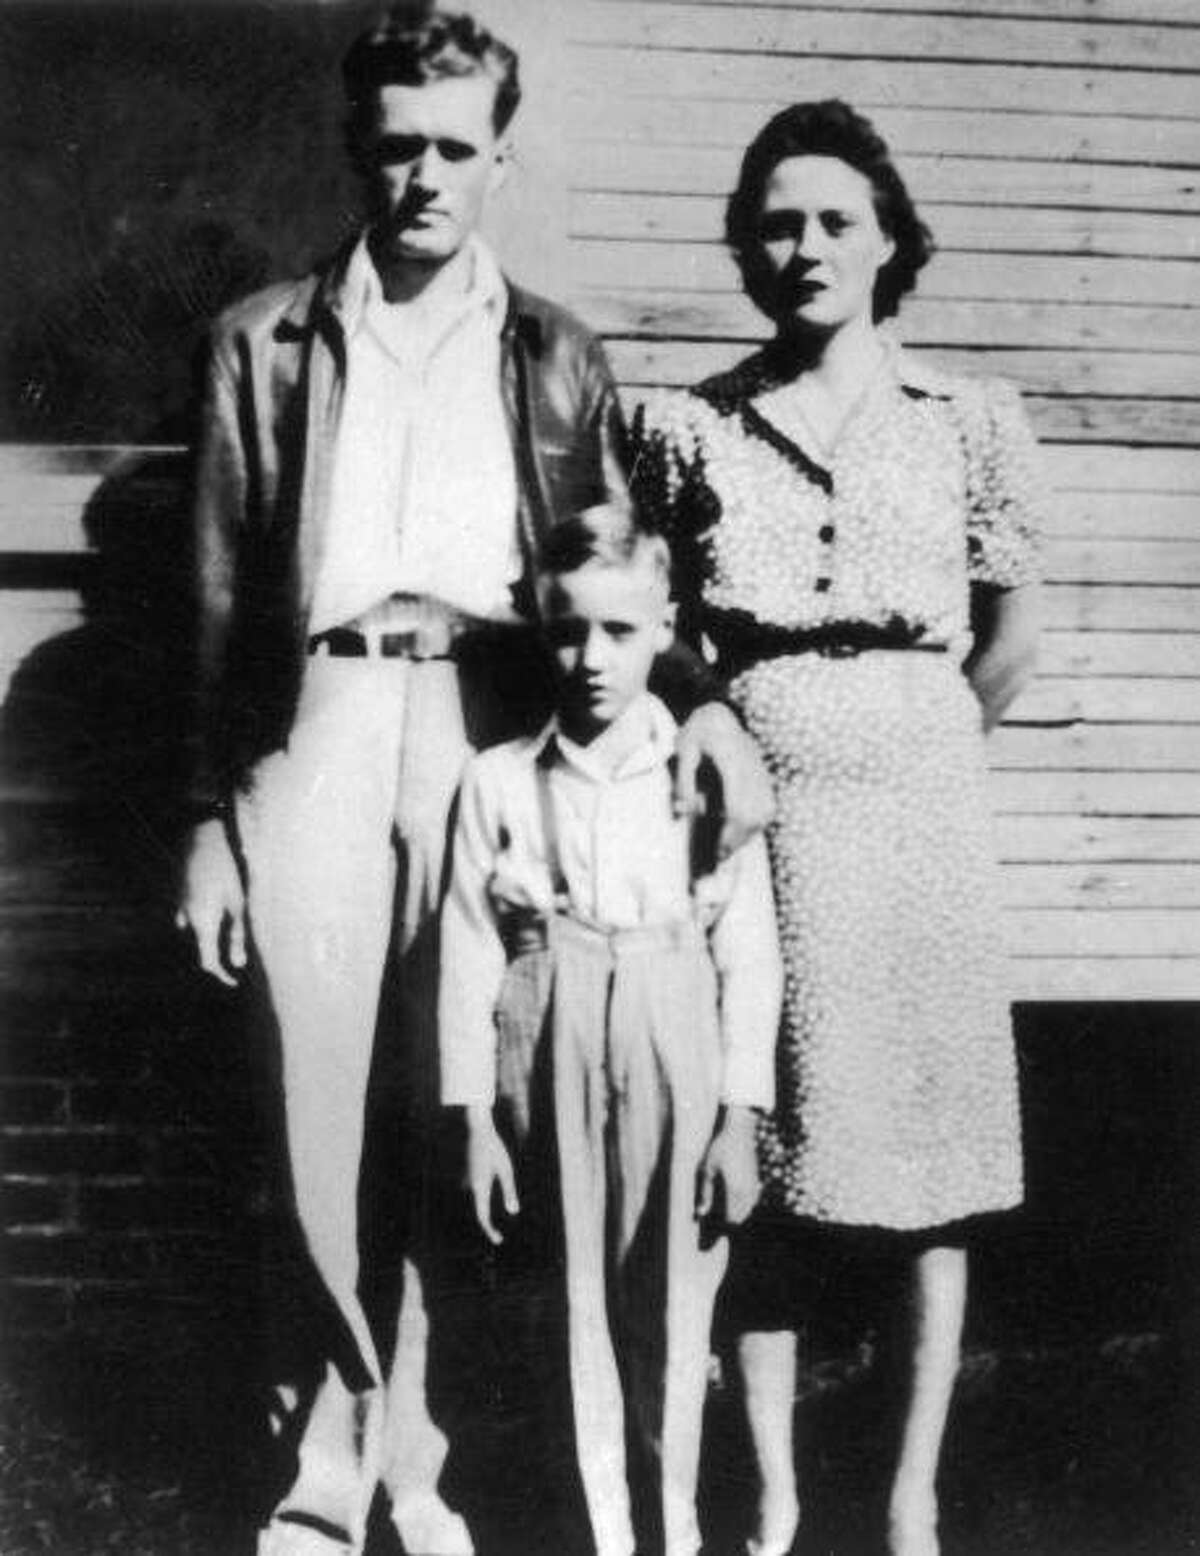 Circa 1945: Elvis Presley standing between his parents outside of their home in Tupelo, Mississippi. (Photo by Hulton Archive/Getty Images) (Getty Images)